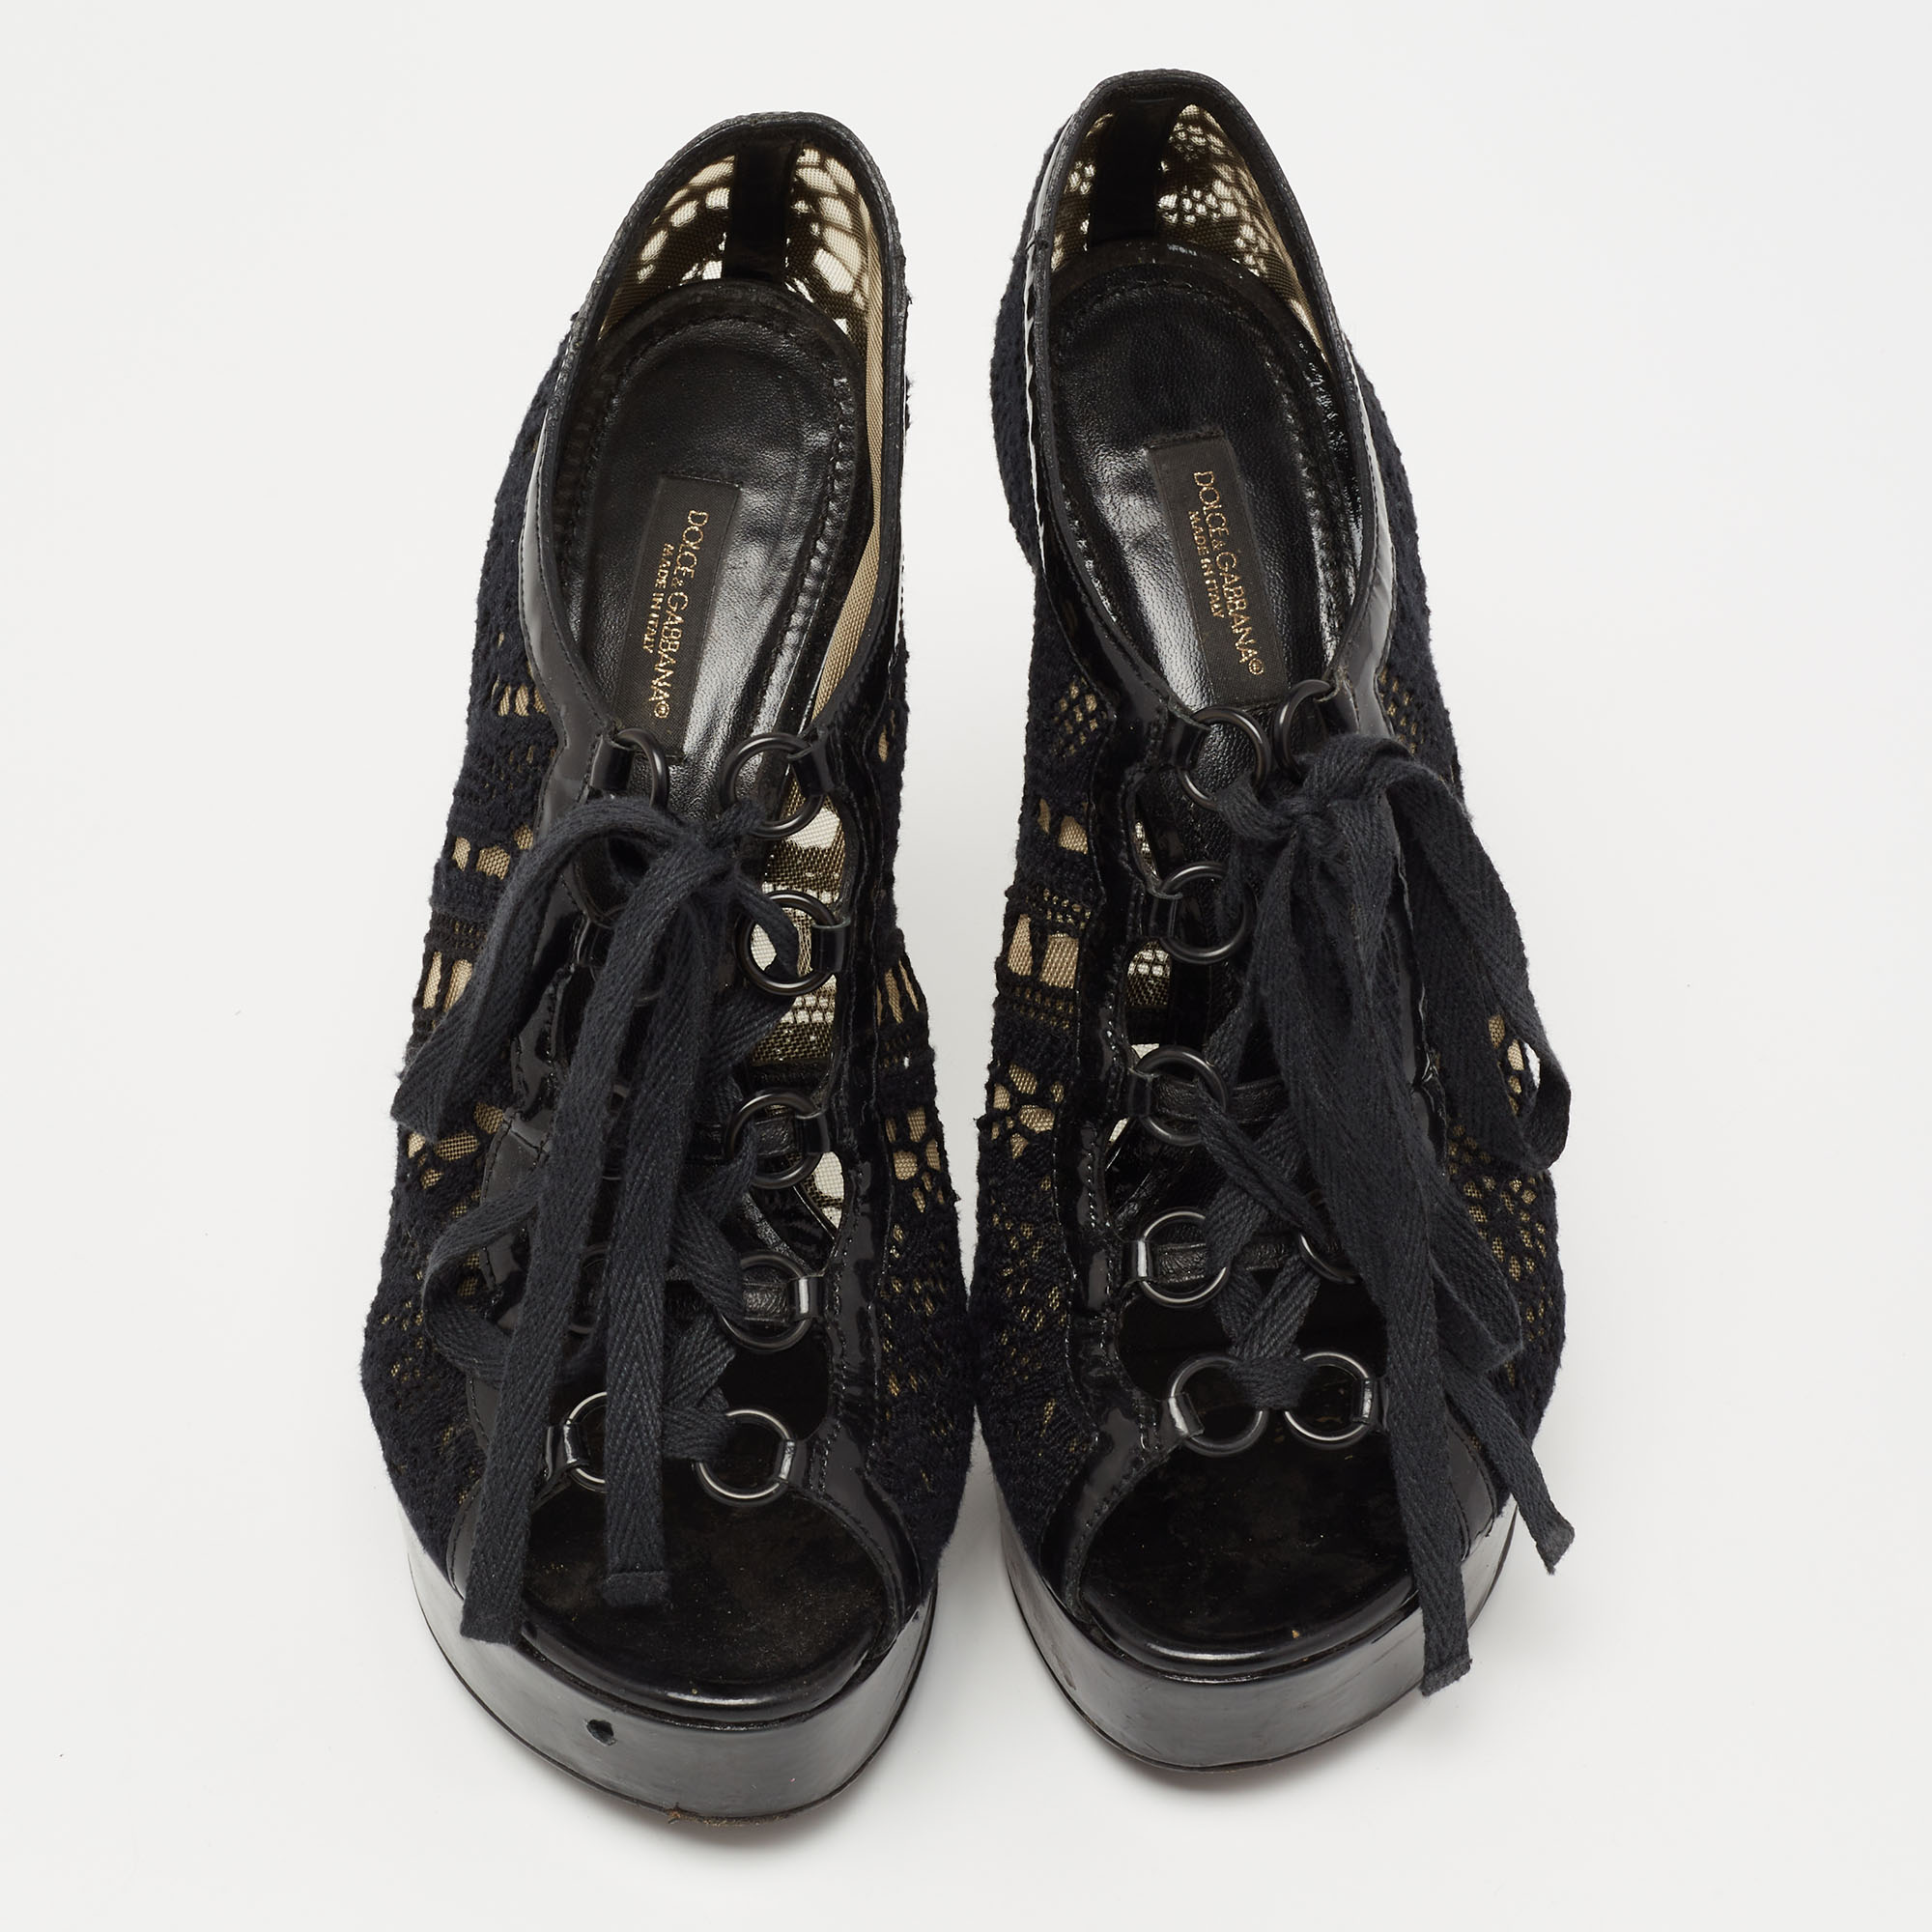 Dolce & Gabbana Black Lace And Patent Leather Lace-Up Peep-Toe Platform Booties Size 37.5